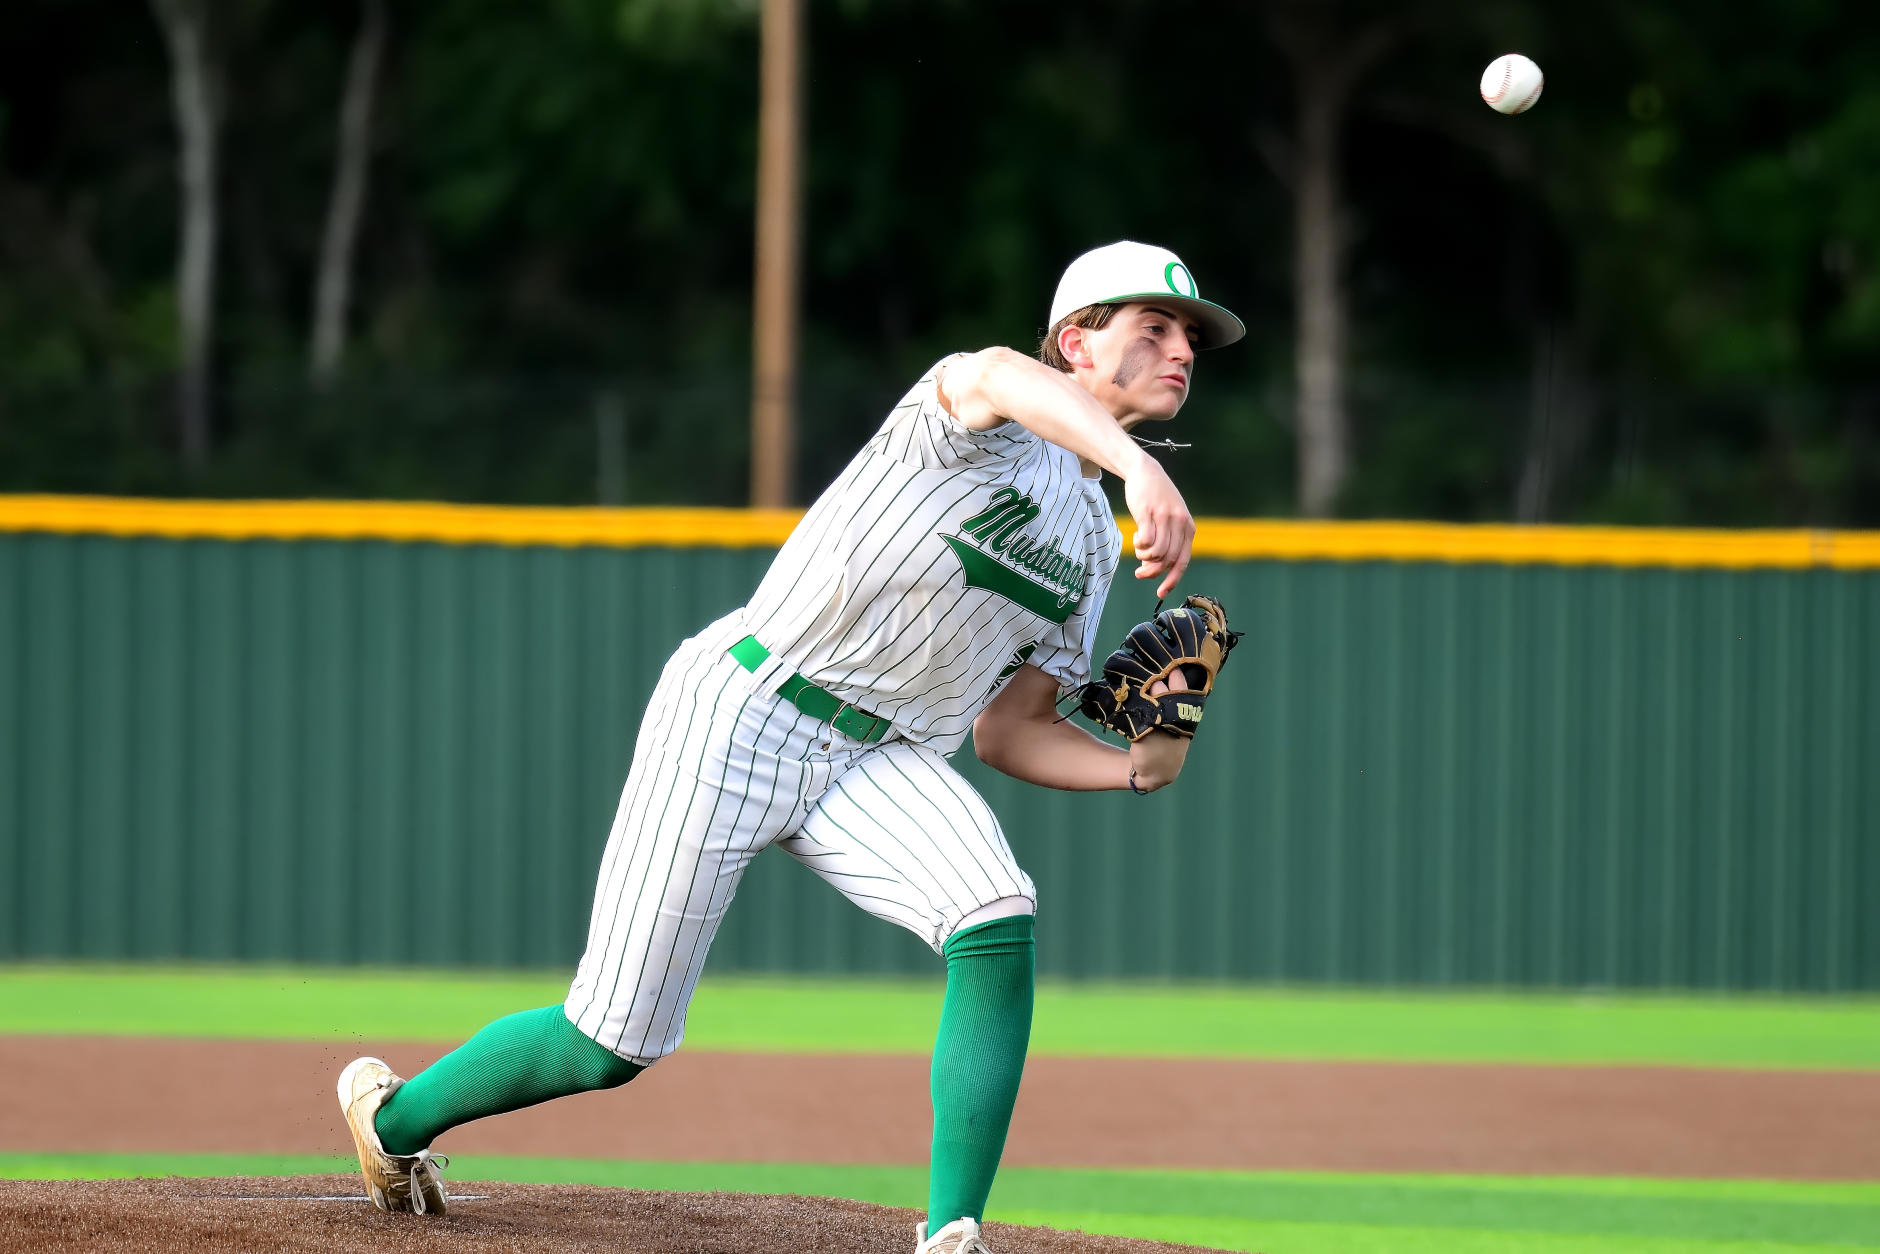 Rylan Holleman on the mound for the Overton Mustangs. Overton led Frankston by four runs (5-1) on Thursday night, but let the lead slip away in the UIL Class 2A bi-district round playoff. But it's a best-of-three series and it resumes tonight in Winnsboro at 7:30 p.m., with game two. Below: Mason Rowe attempts a pick-off, but the runner was ruled safe. (Photo by RONNIE SARTORS -SPORT SHOT PHOTOGRAPHY)